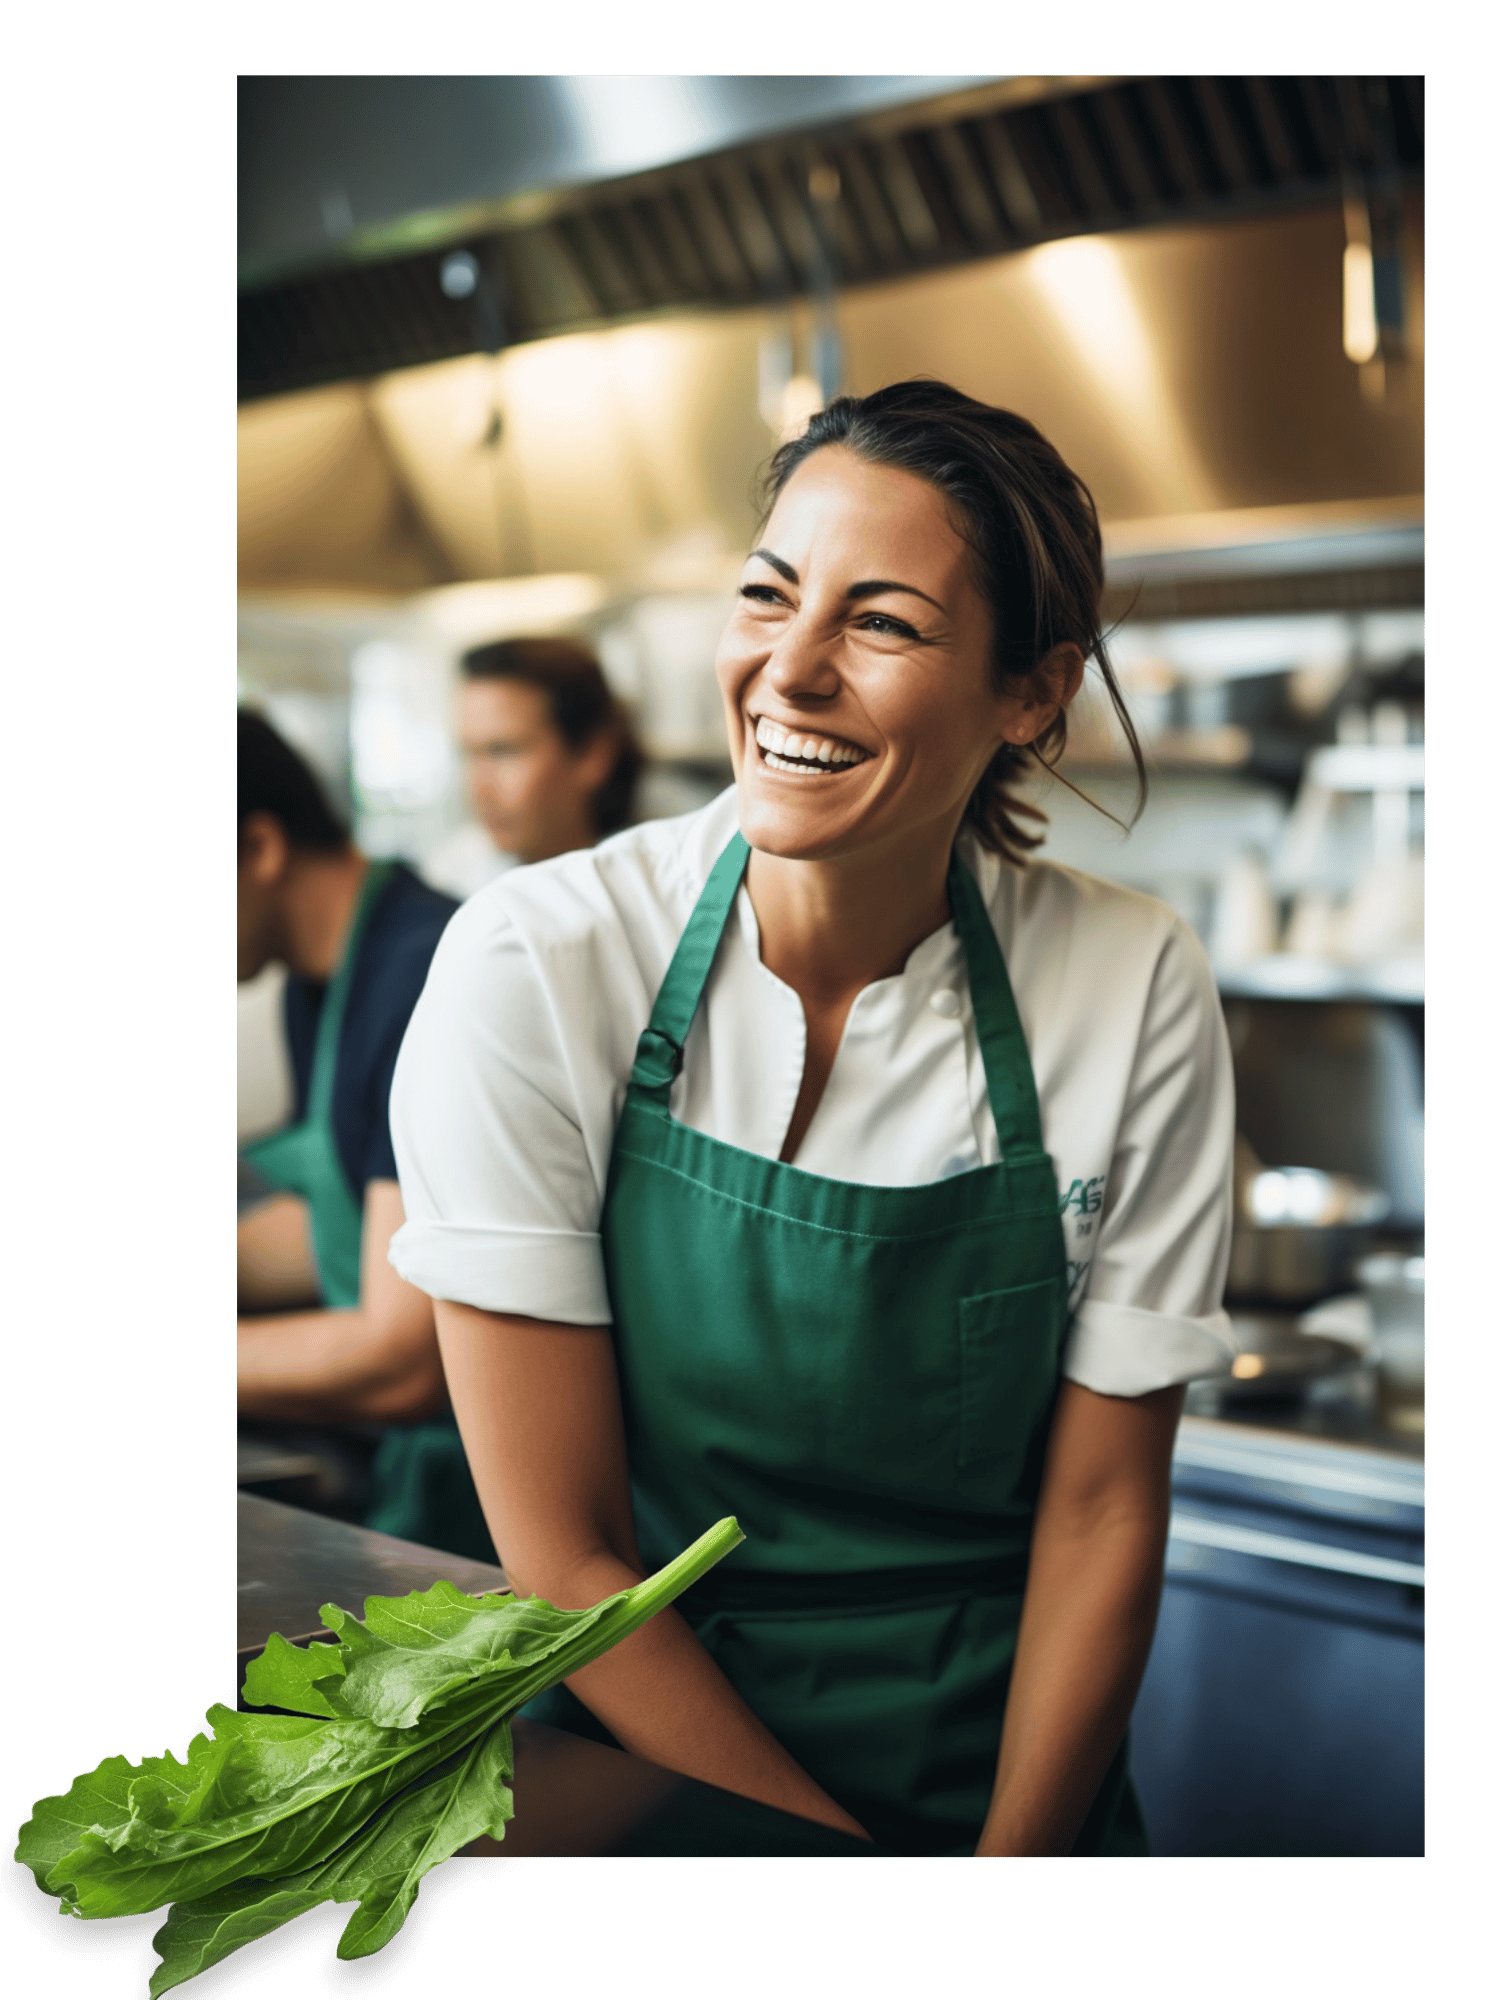 ianc_10992_a_photo_of_a_female_chef_laughing_in_a_commercial_ki_fa08ca95-894d-46c3-9651-a479c8856896 (copy)-PhotoRoom (1)